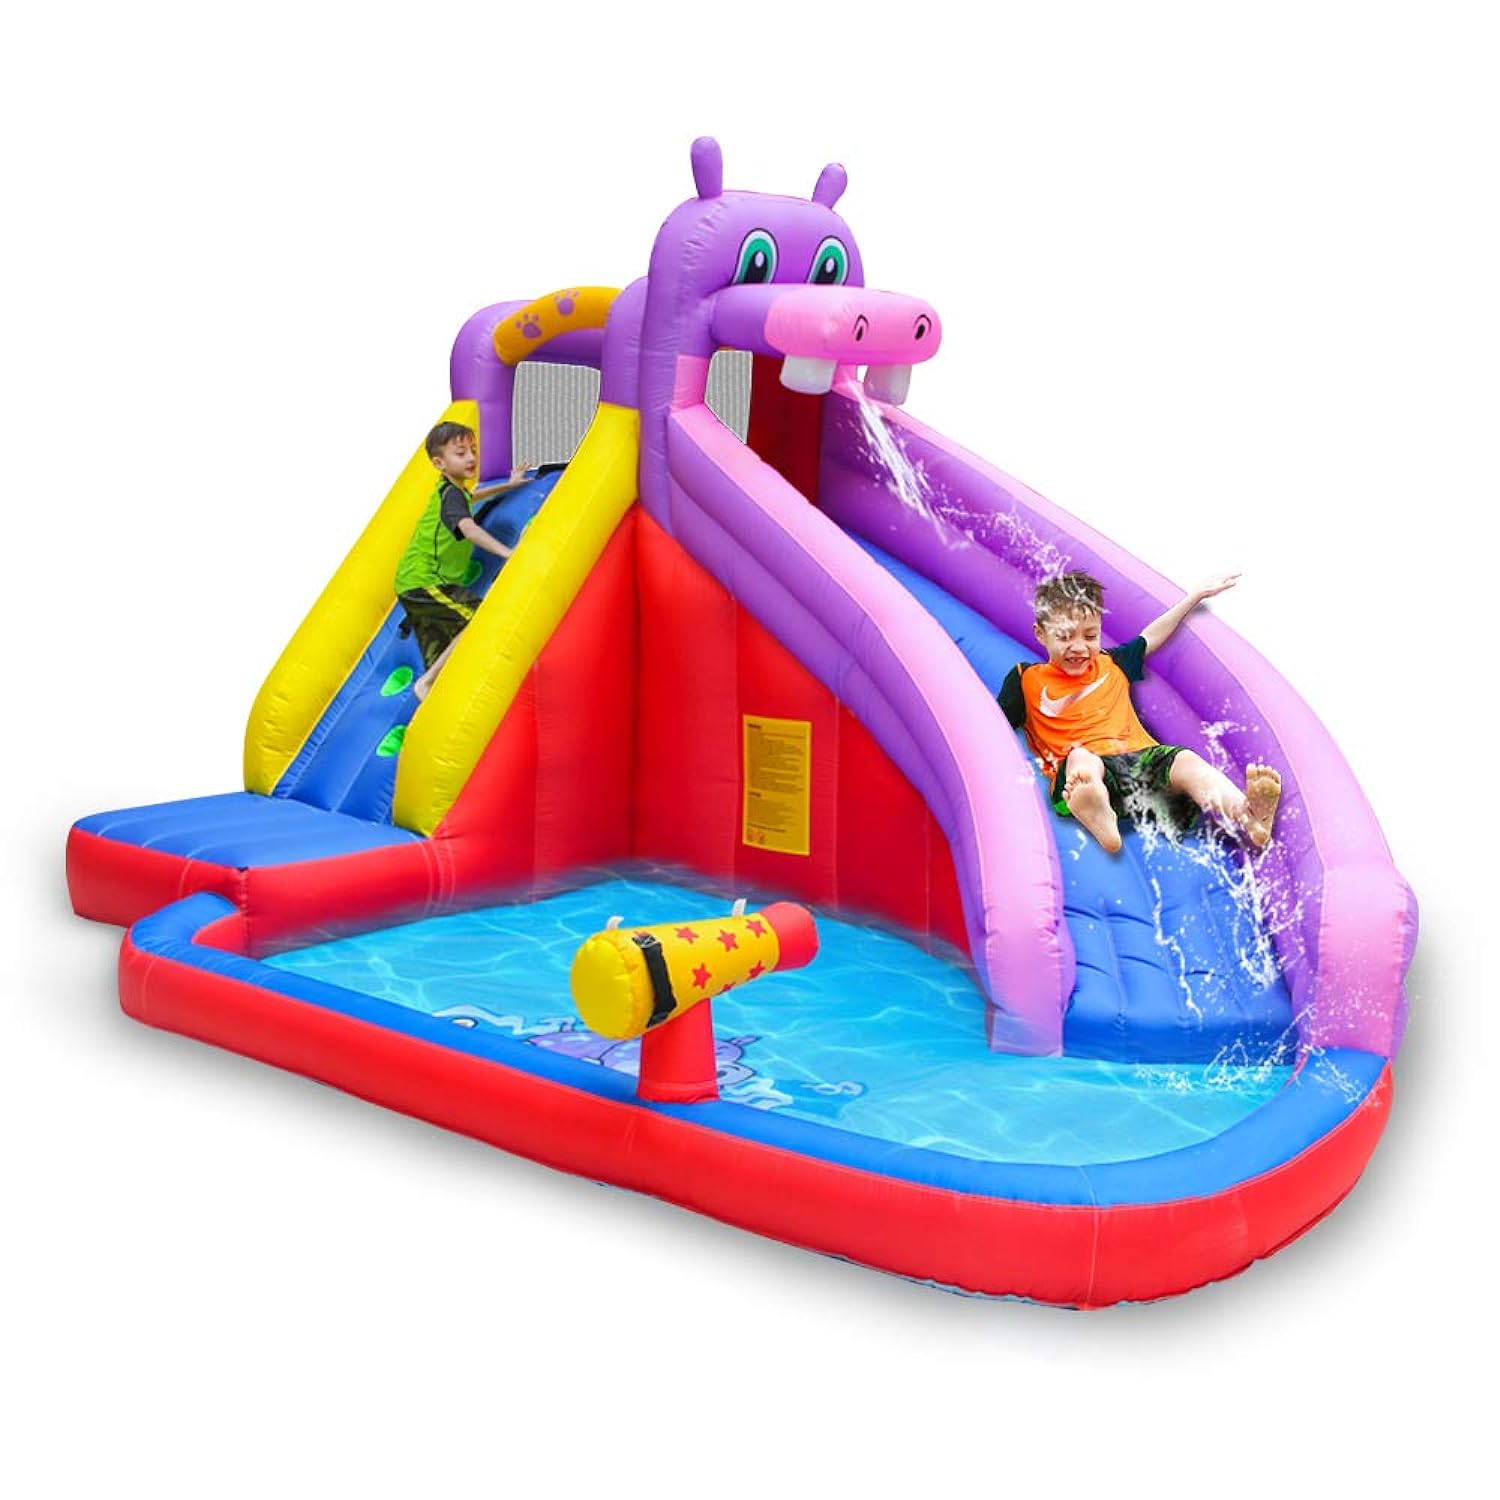 Great Choice Products Inflatable Water Slide With Blower,Long Water Slides For Kids Backyard With Climbing Wall,Kids Bounce House With Slide,H…